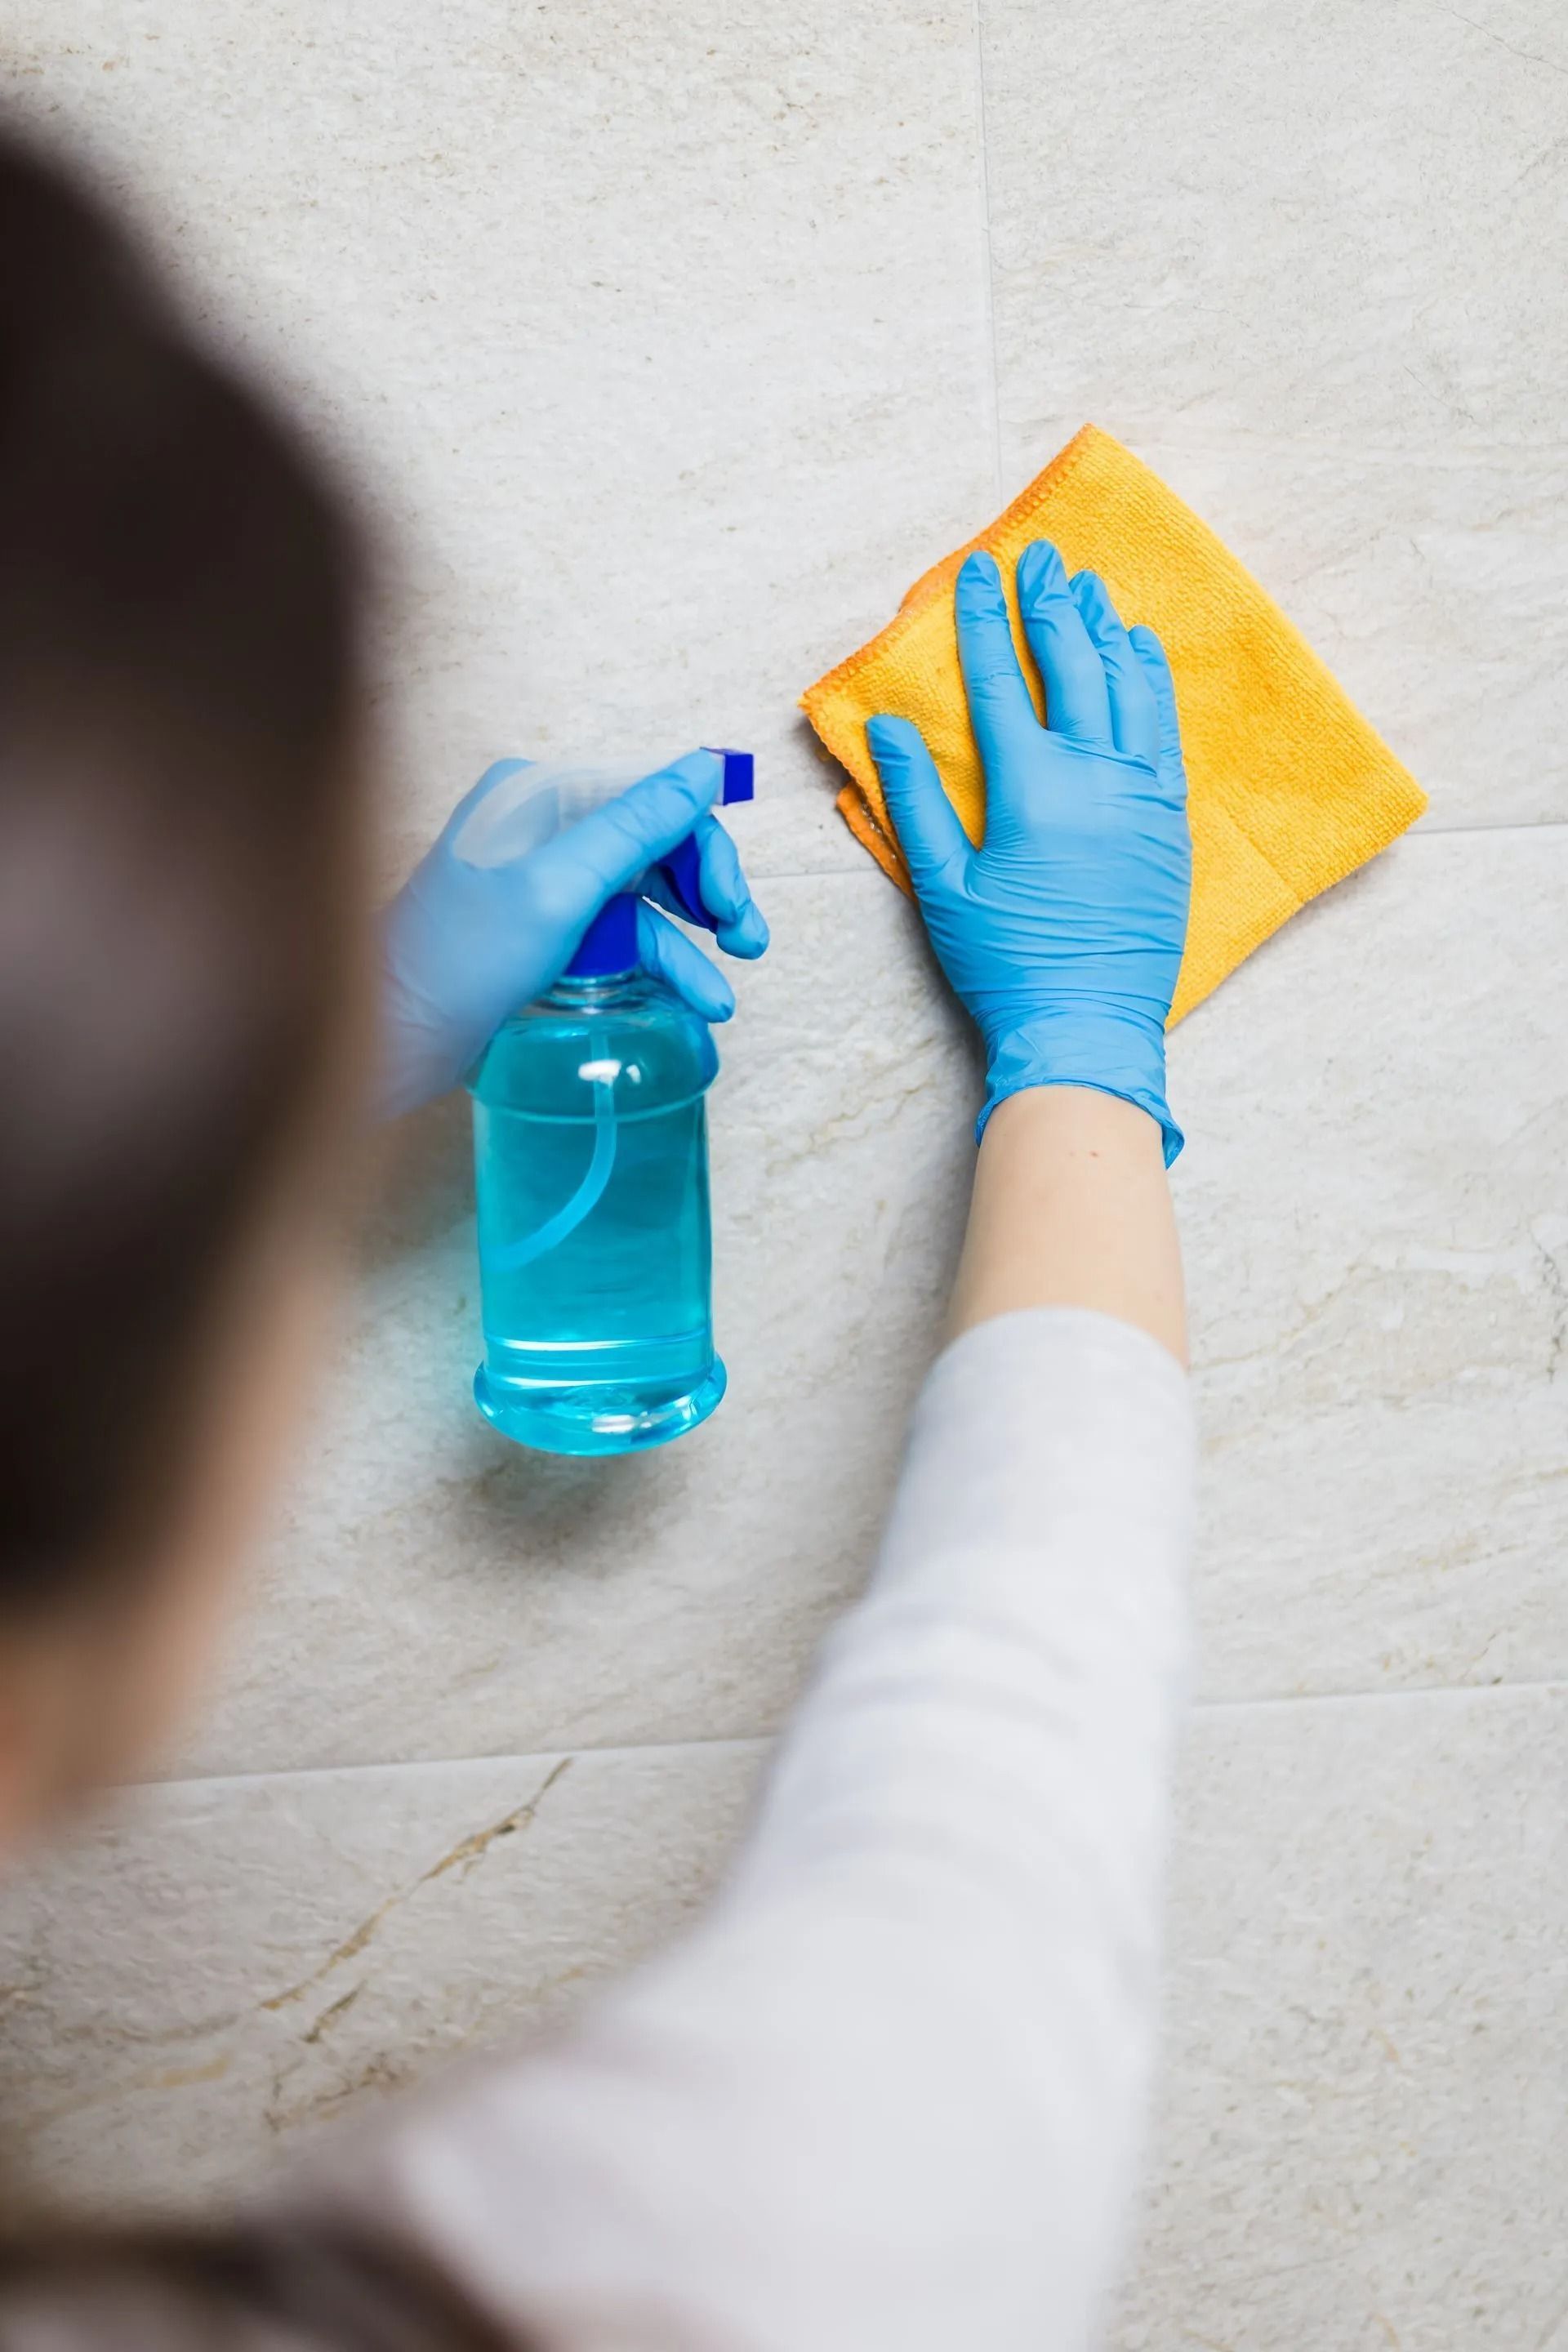 A Woman Is Cleaning the Floor with A Cloth and Spray Bottle